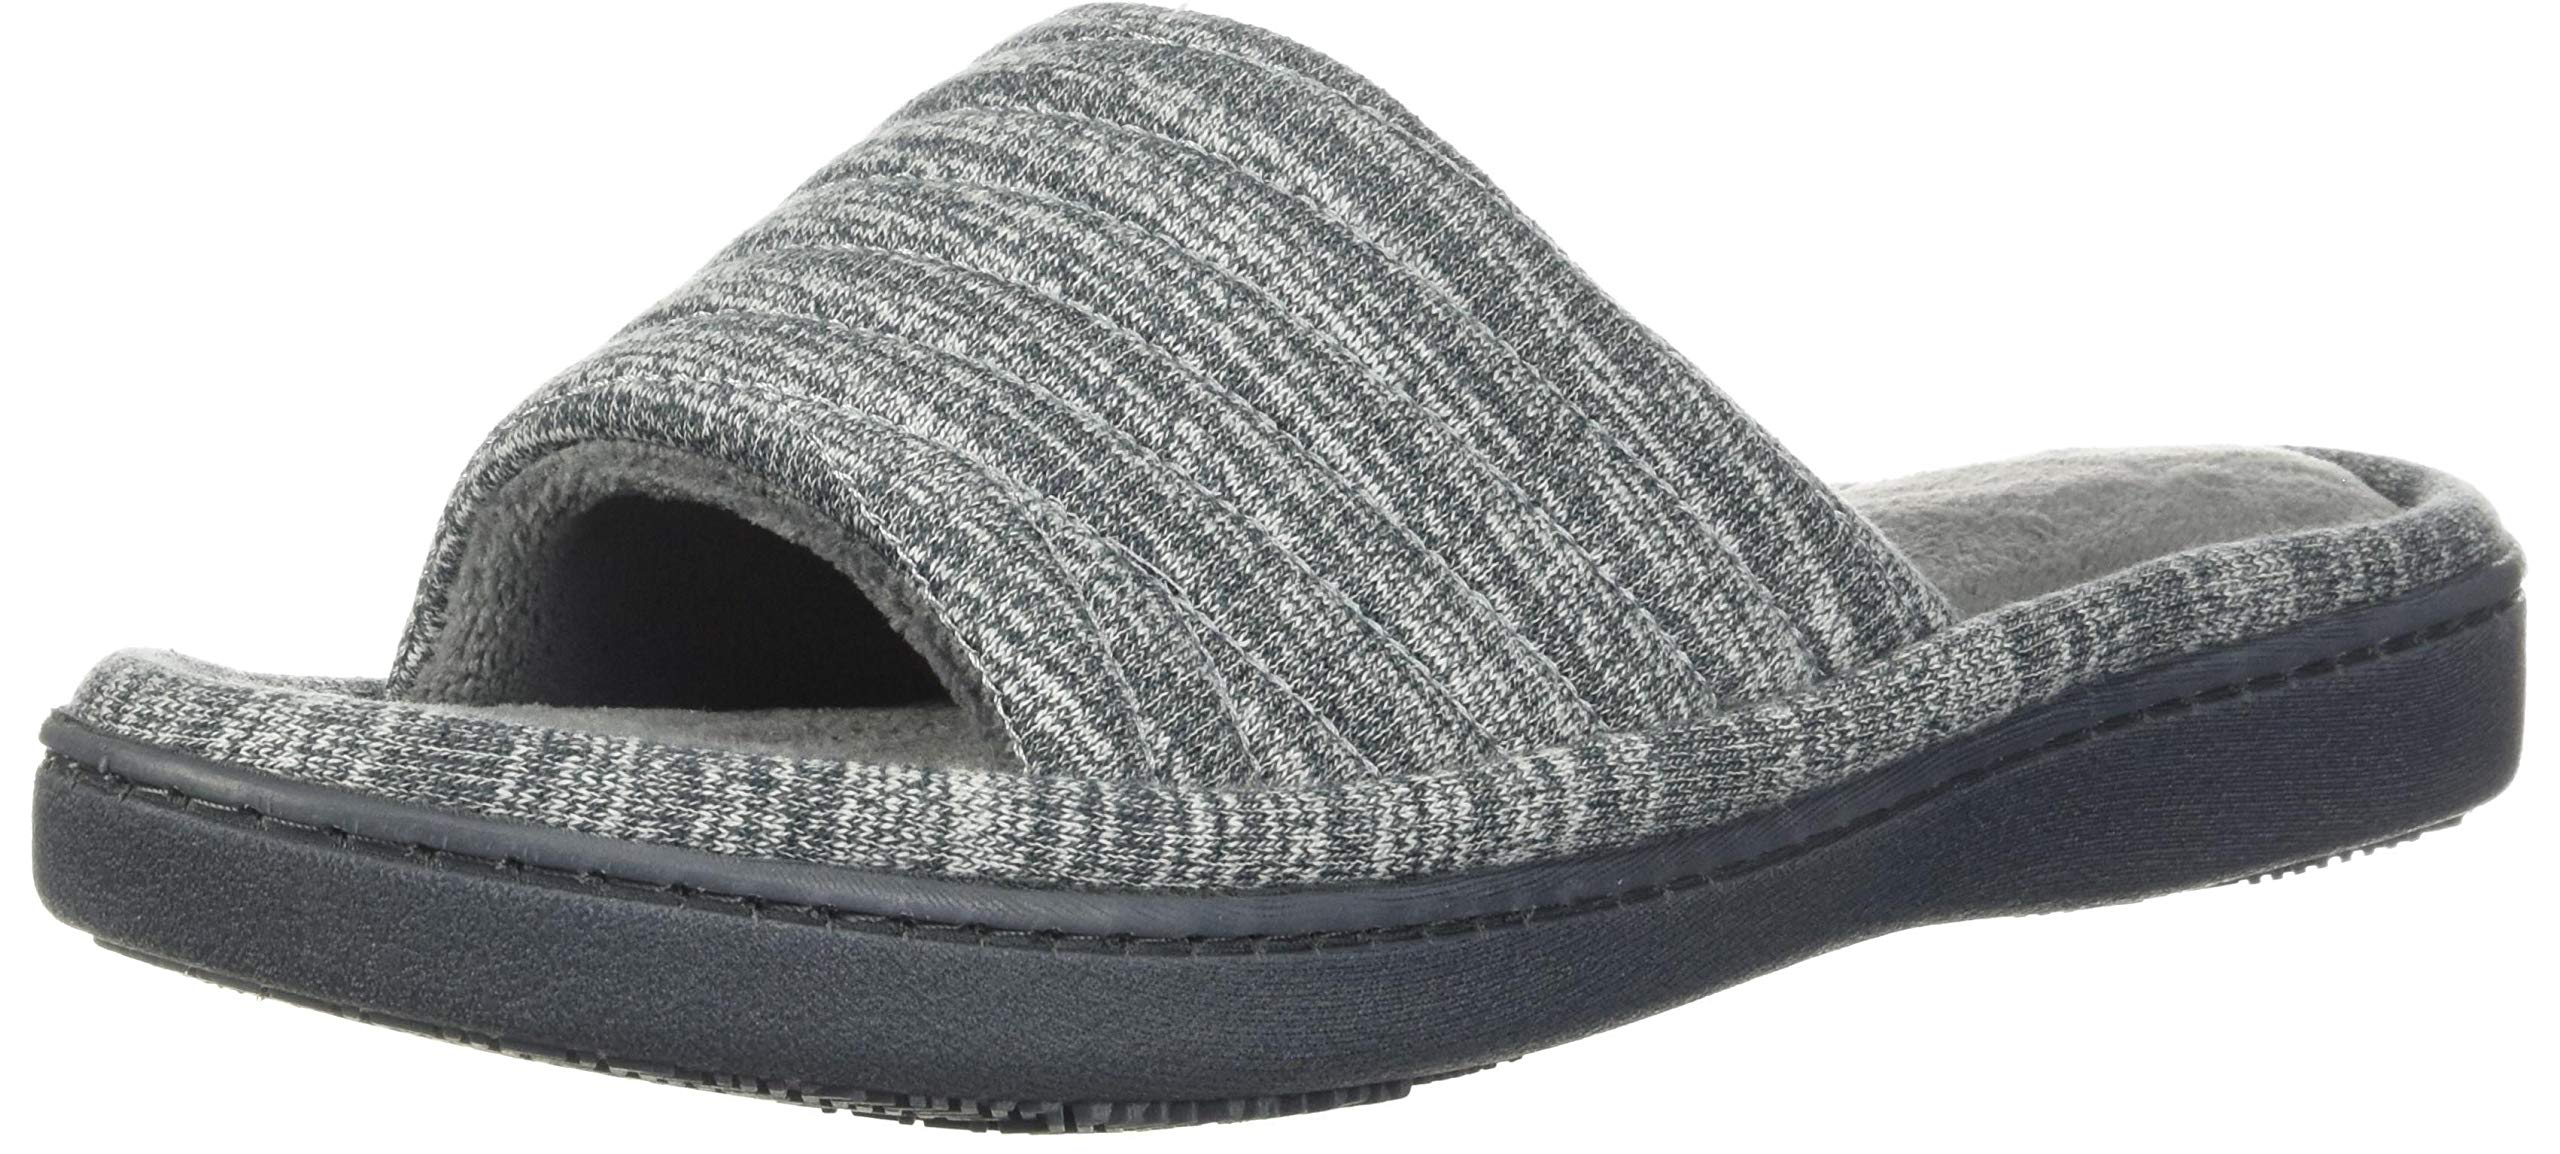 isotoner Women's Andrea Open Toe Slide Slipper with Moisture Wicking for Indoor/Outdoor Comfort and Arch Support